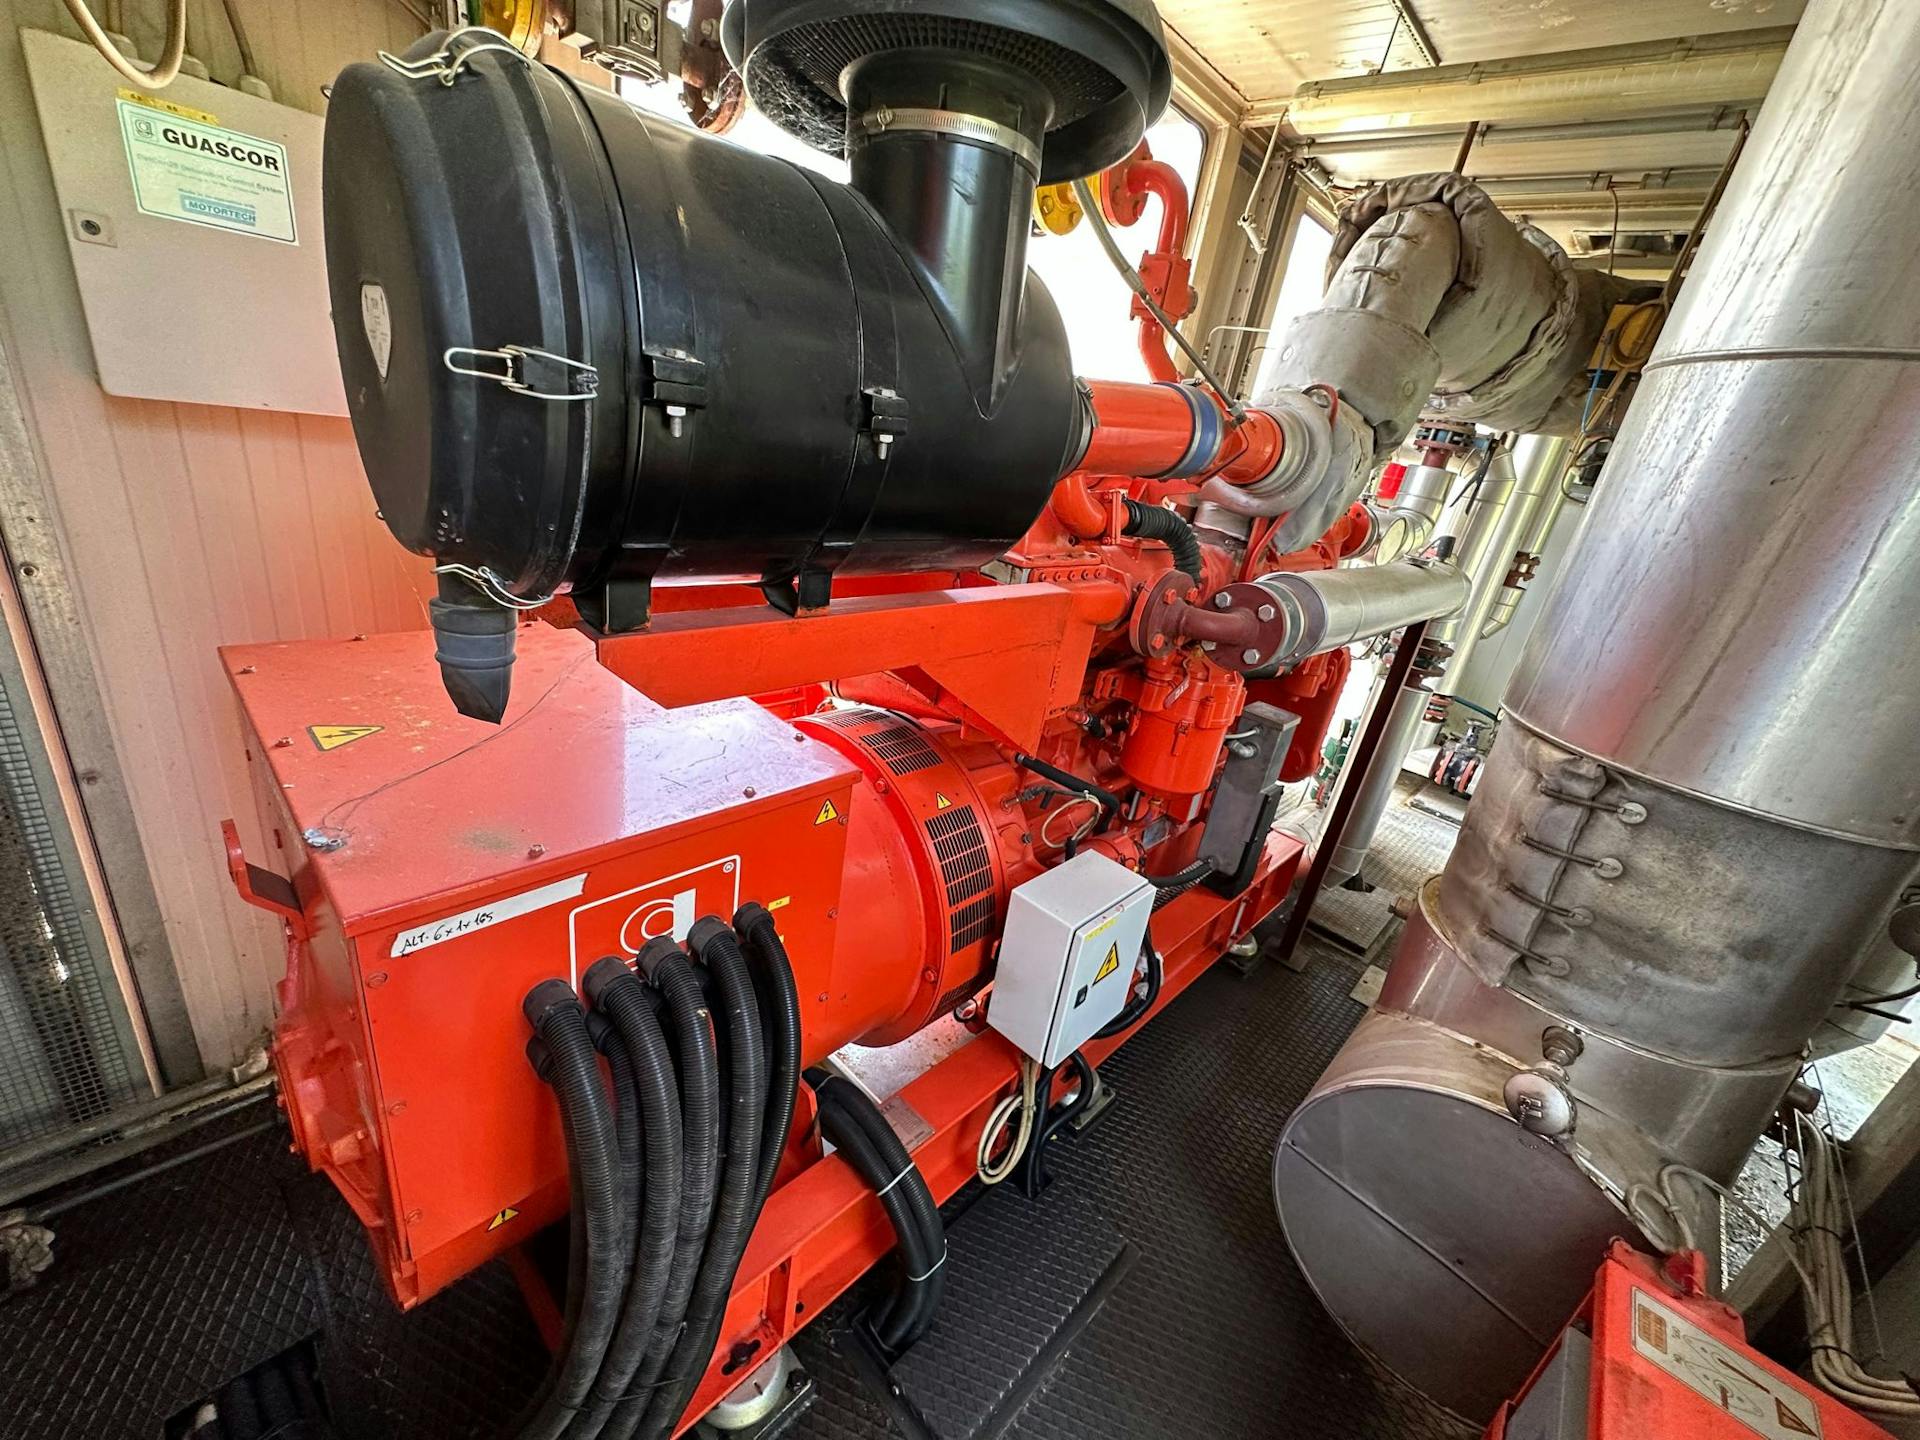 nullPhoto of Guascor FGLD180 Natural Gas Generator Set showing inside with gas engine - used genset for sale uk 